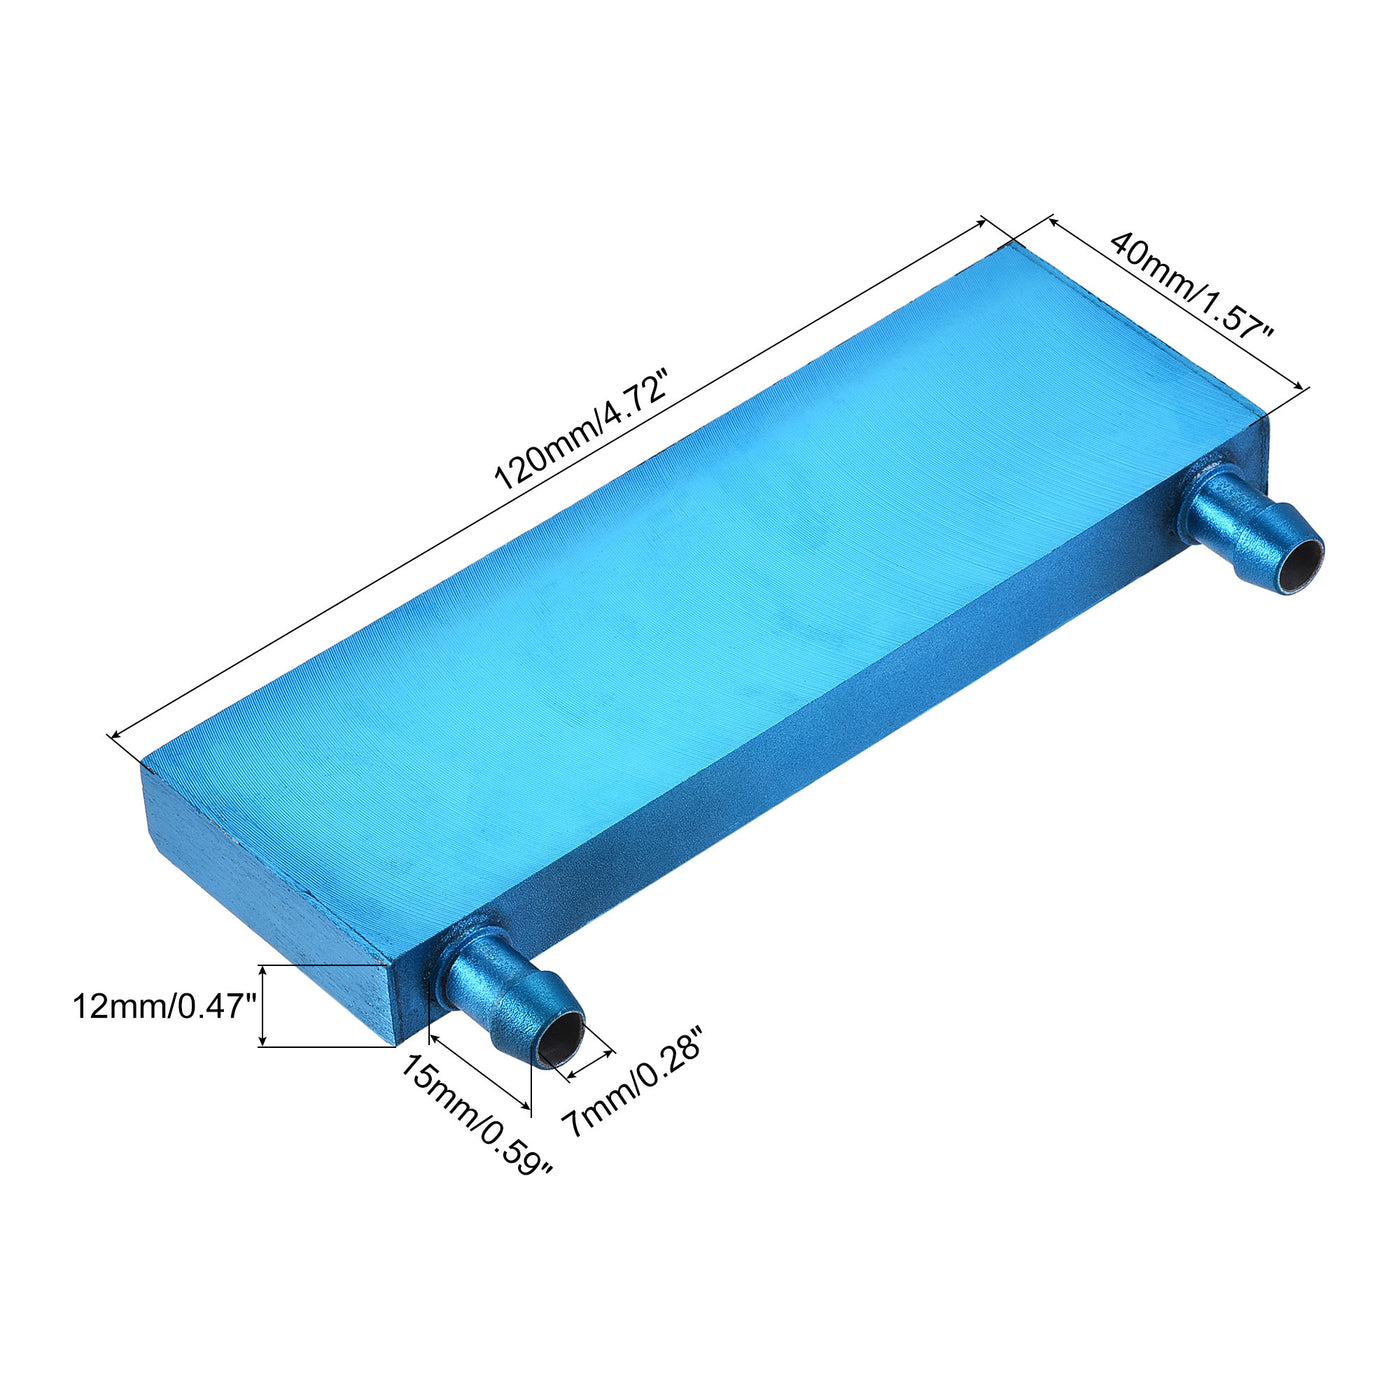 uxcell Uxcell Aluminum Water Cooling Block 120x40x12mm Heatsink with Side Nozzle Blue